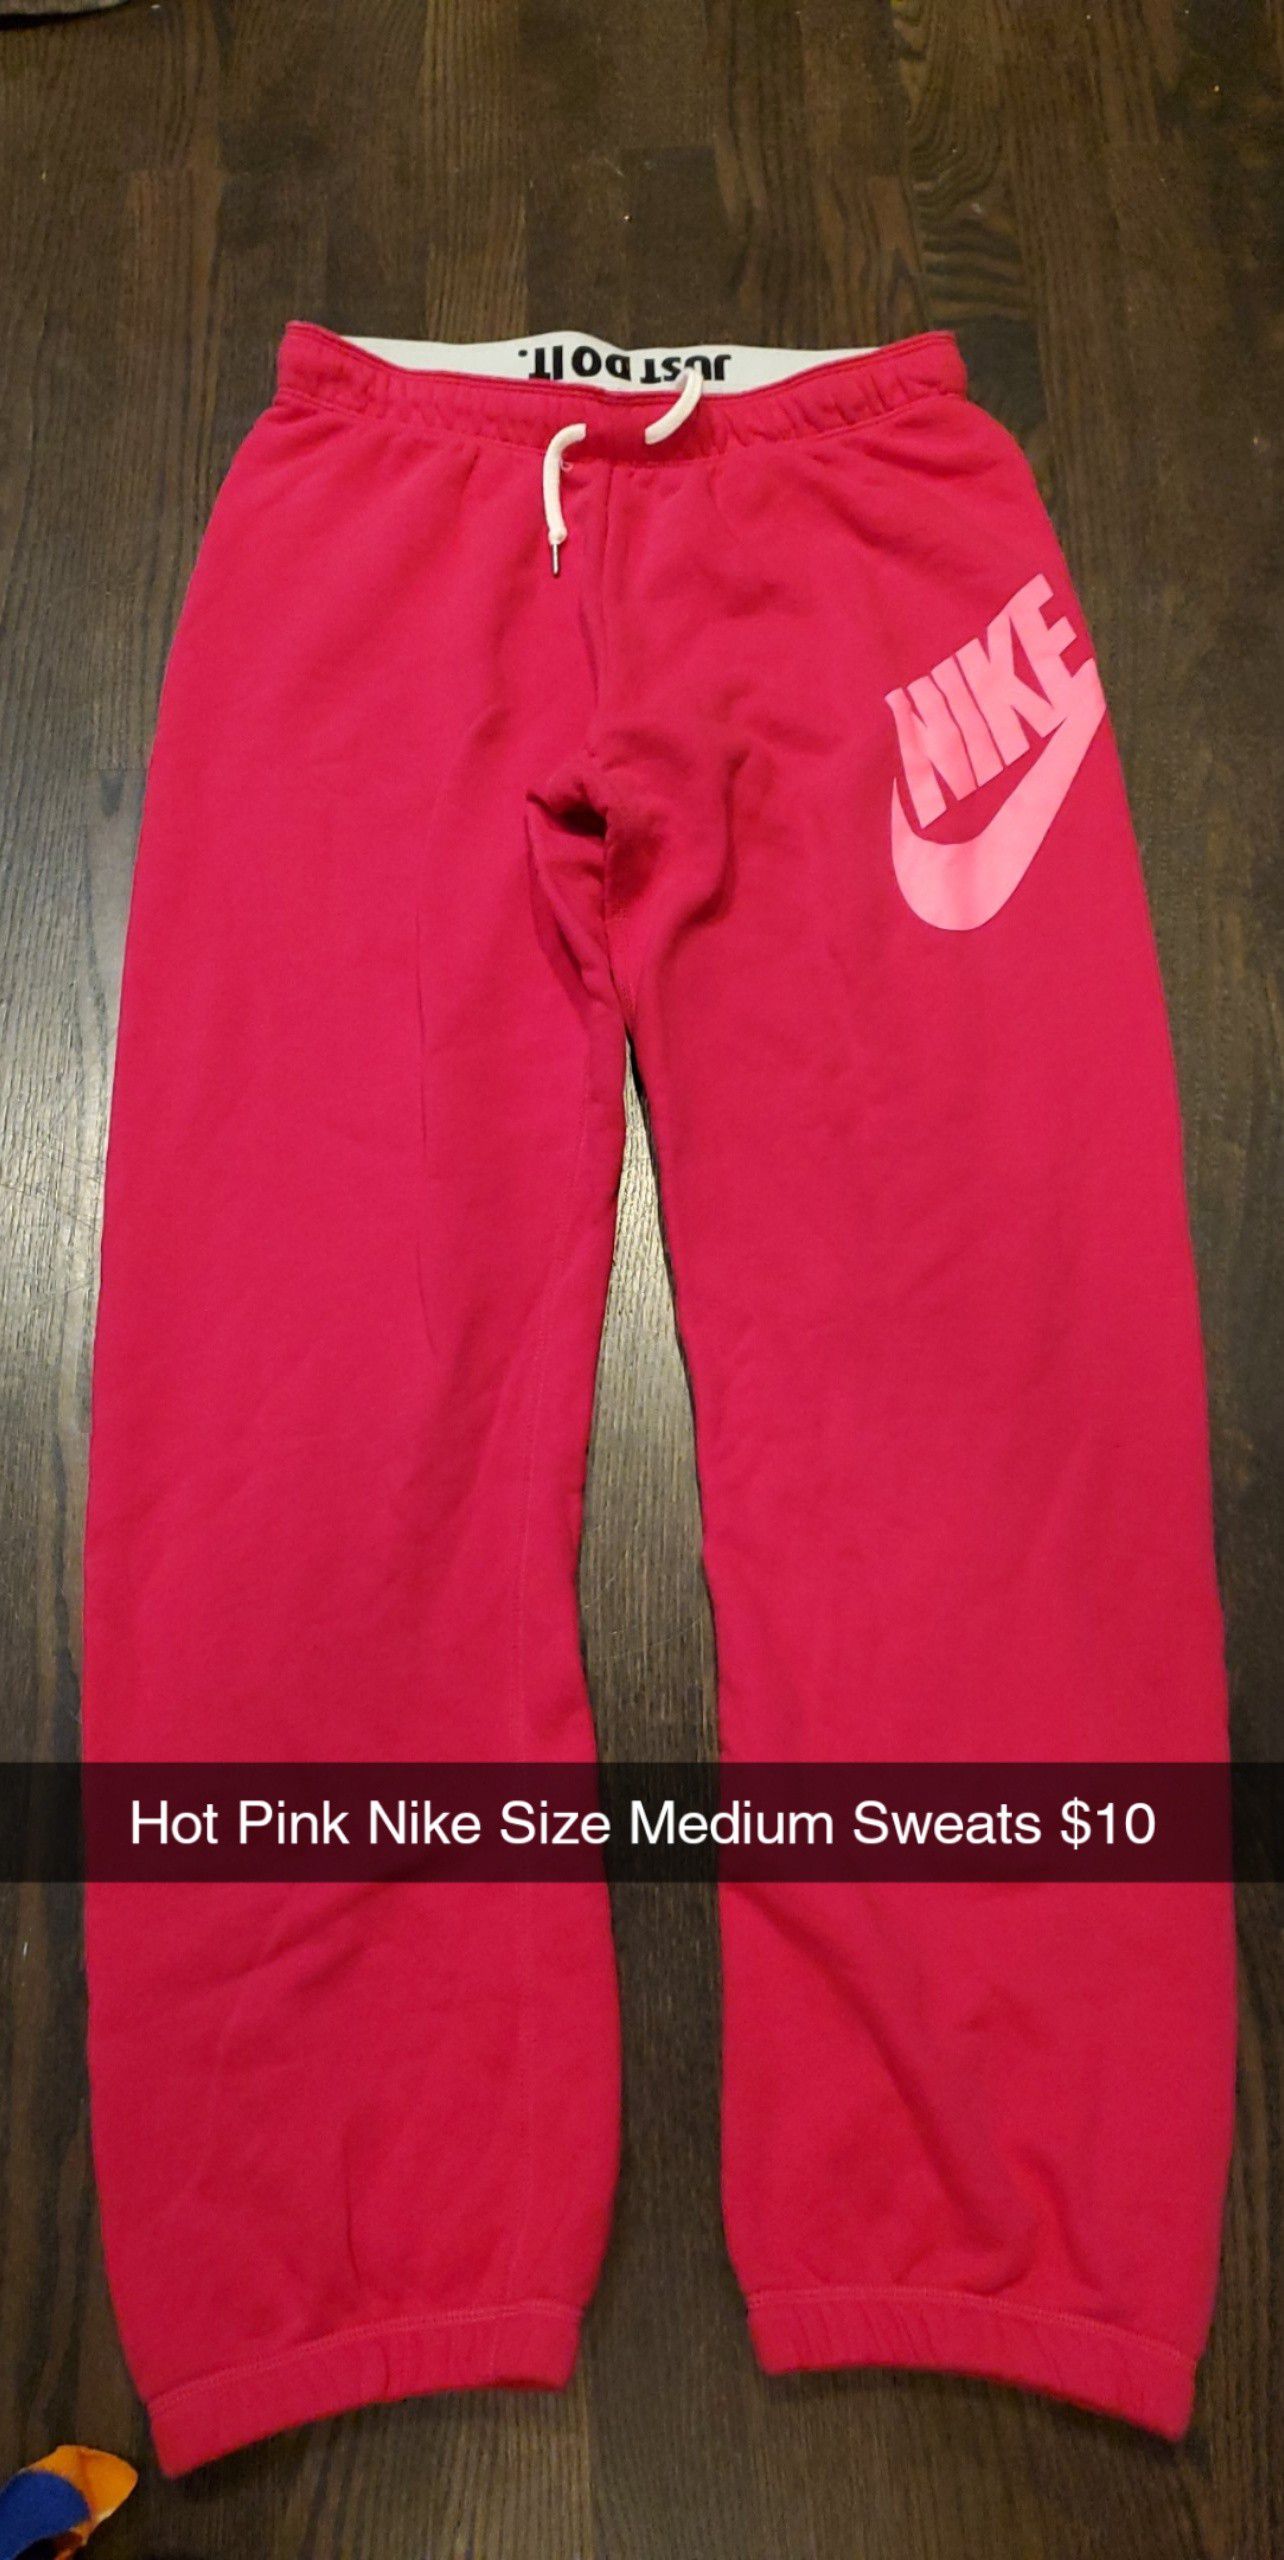 Hot Pink Nike Size Medium Sweat pants - Naperville Pick up Only